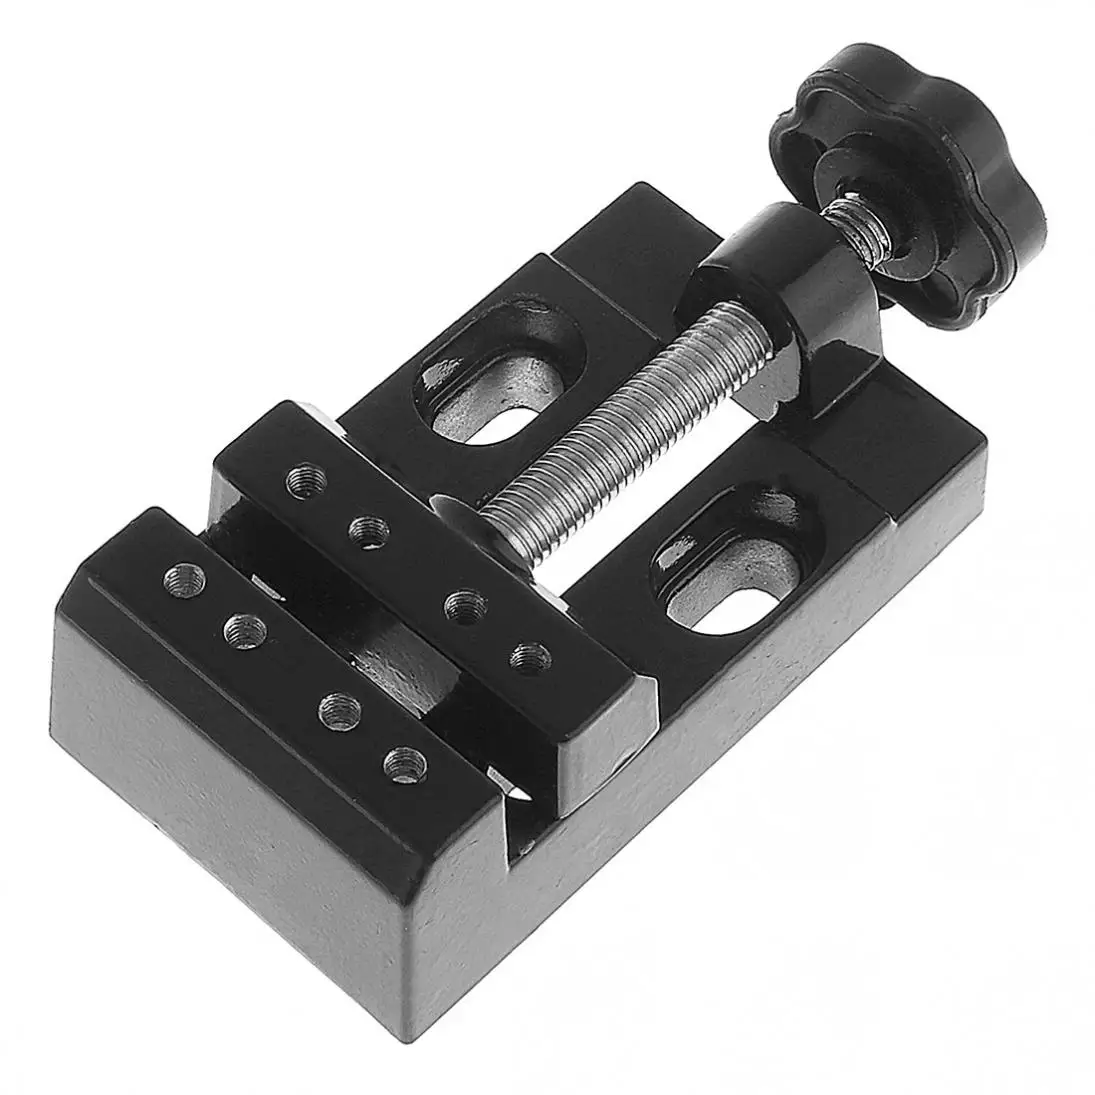 New DIY Sculpture Craft Jaw Bench Clamp Press Vice Opening Parallel Table Vise for Jaw Bench Clamp Drill high quality mini table vice bench mini vise vice bench vise for diy jewelries craft mould fixed repair tool